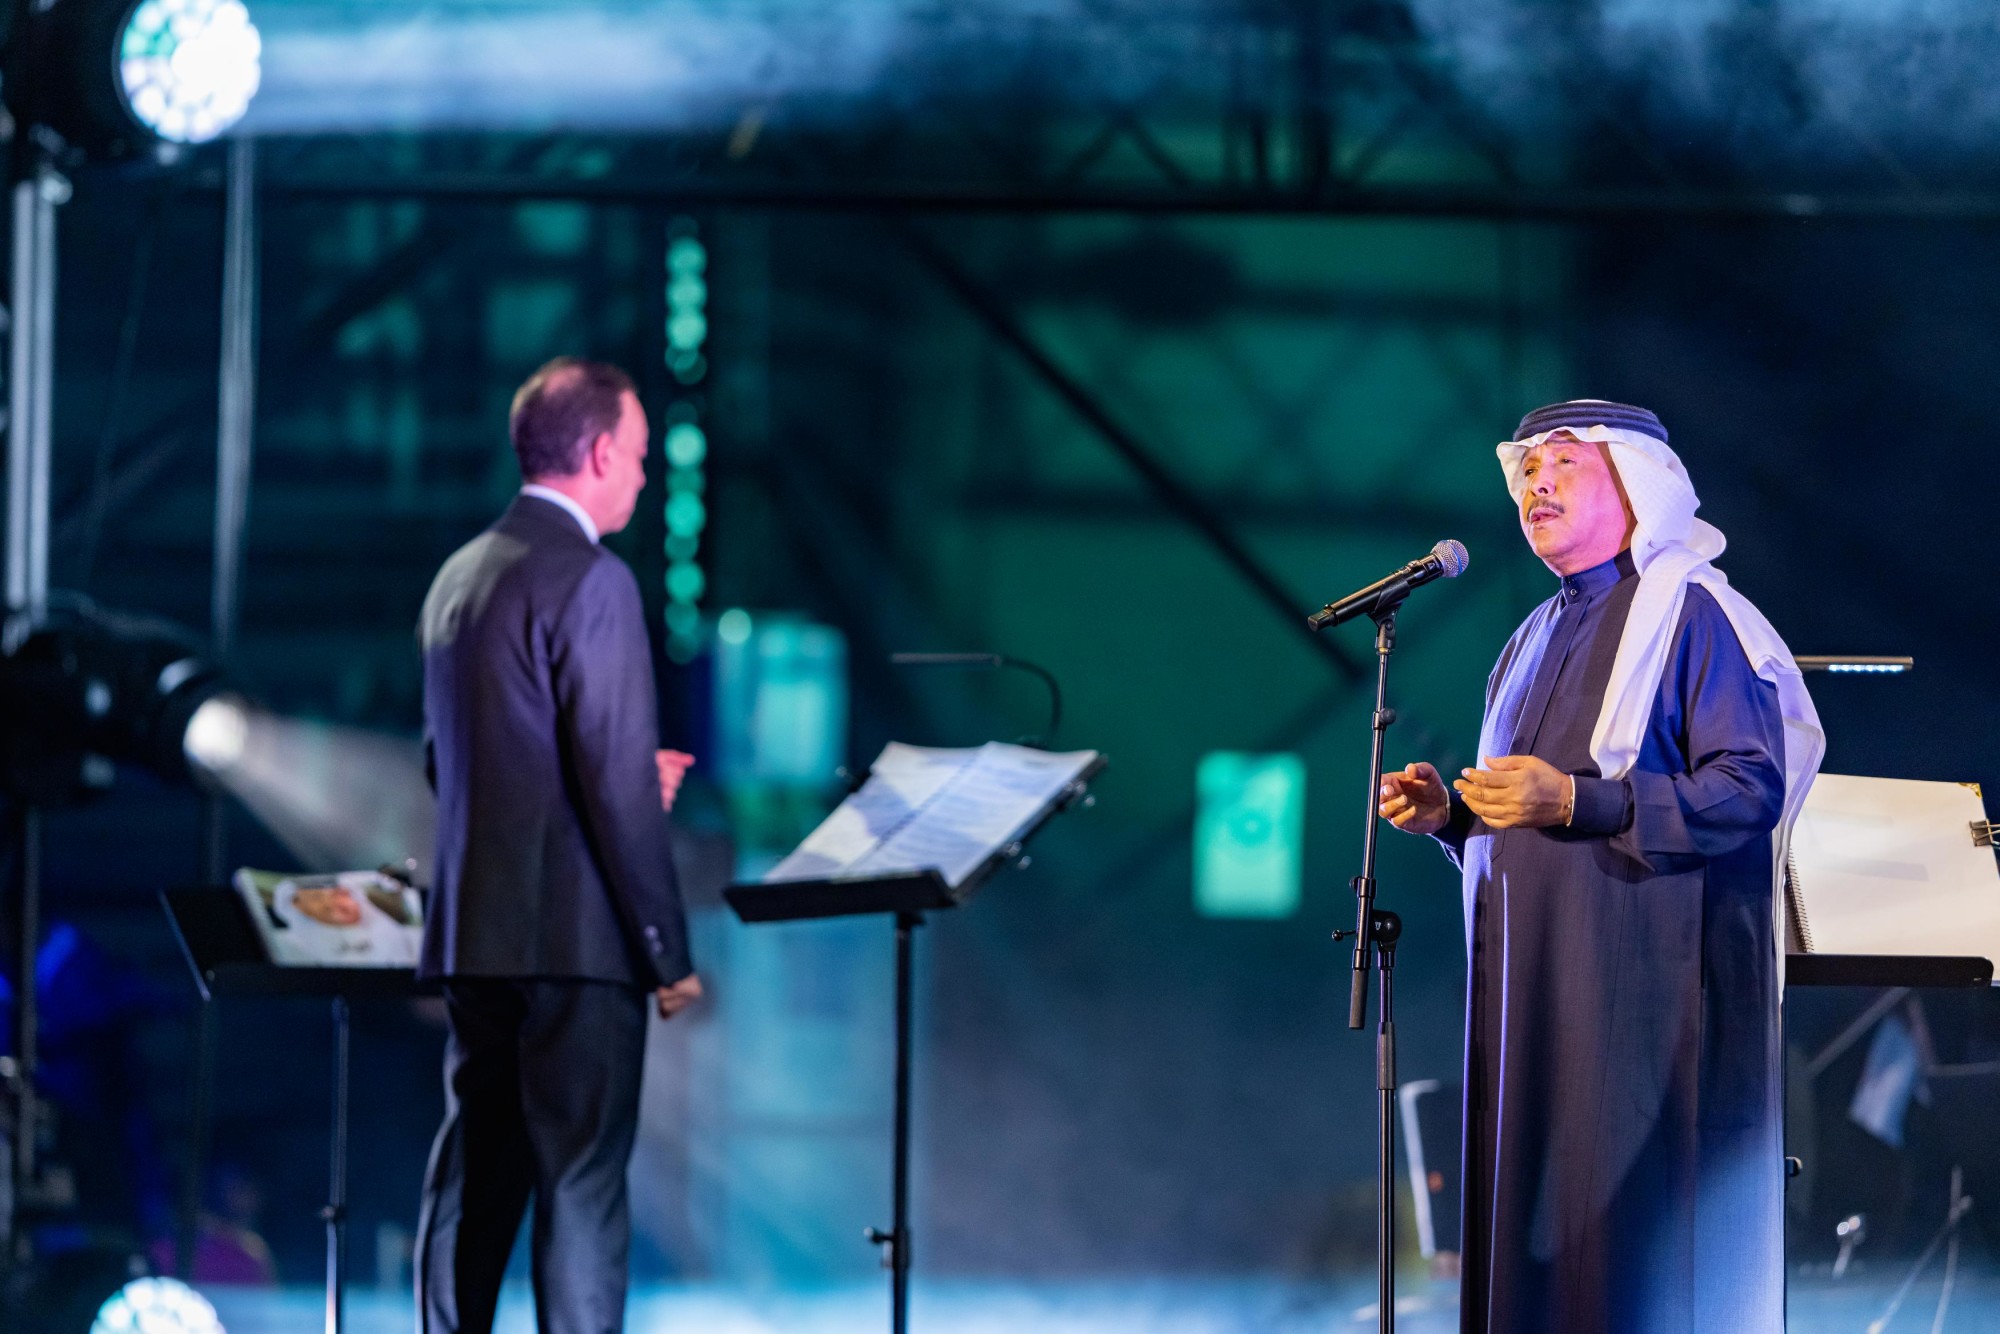 Mohammed Abdo performs at Jubilee Stage during the Kingdom of Saudi Arabia National Day m30541